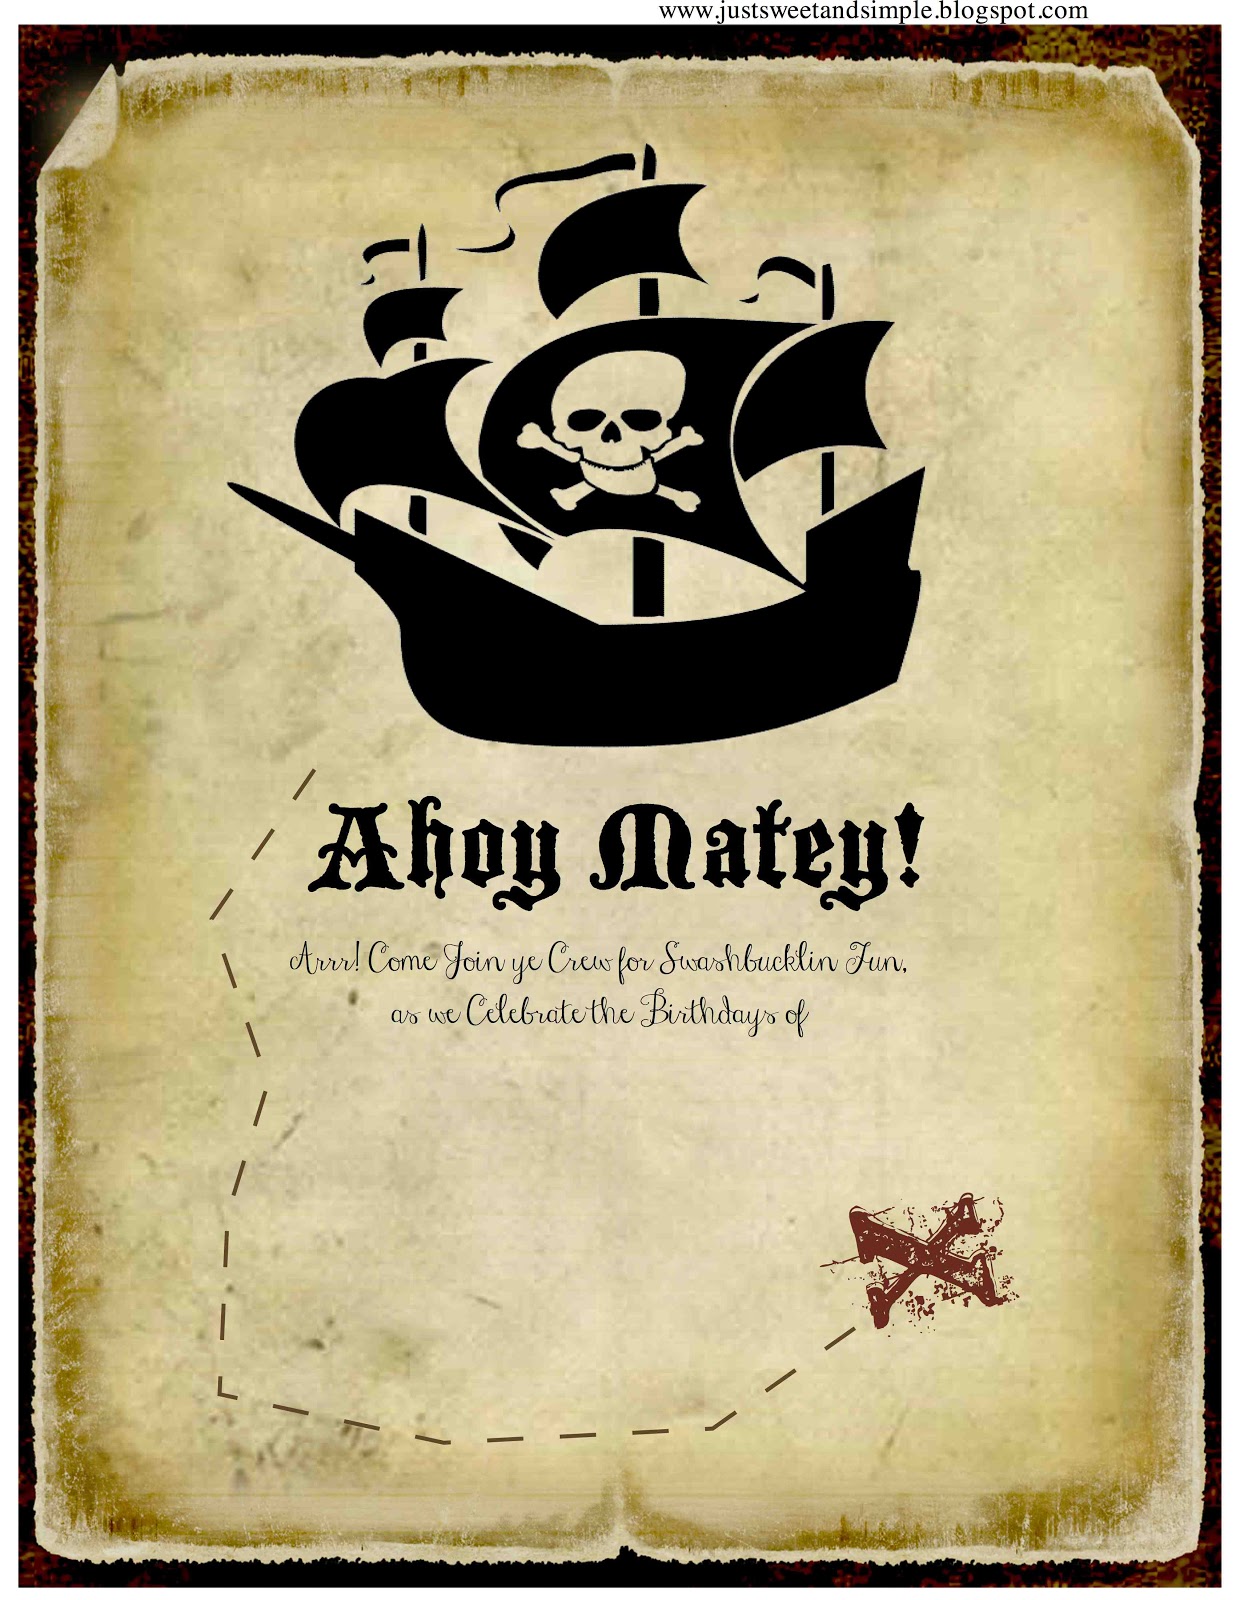 just-sweet-and-simple-pirate-party-invitations